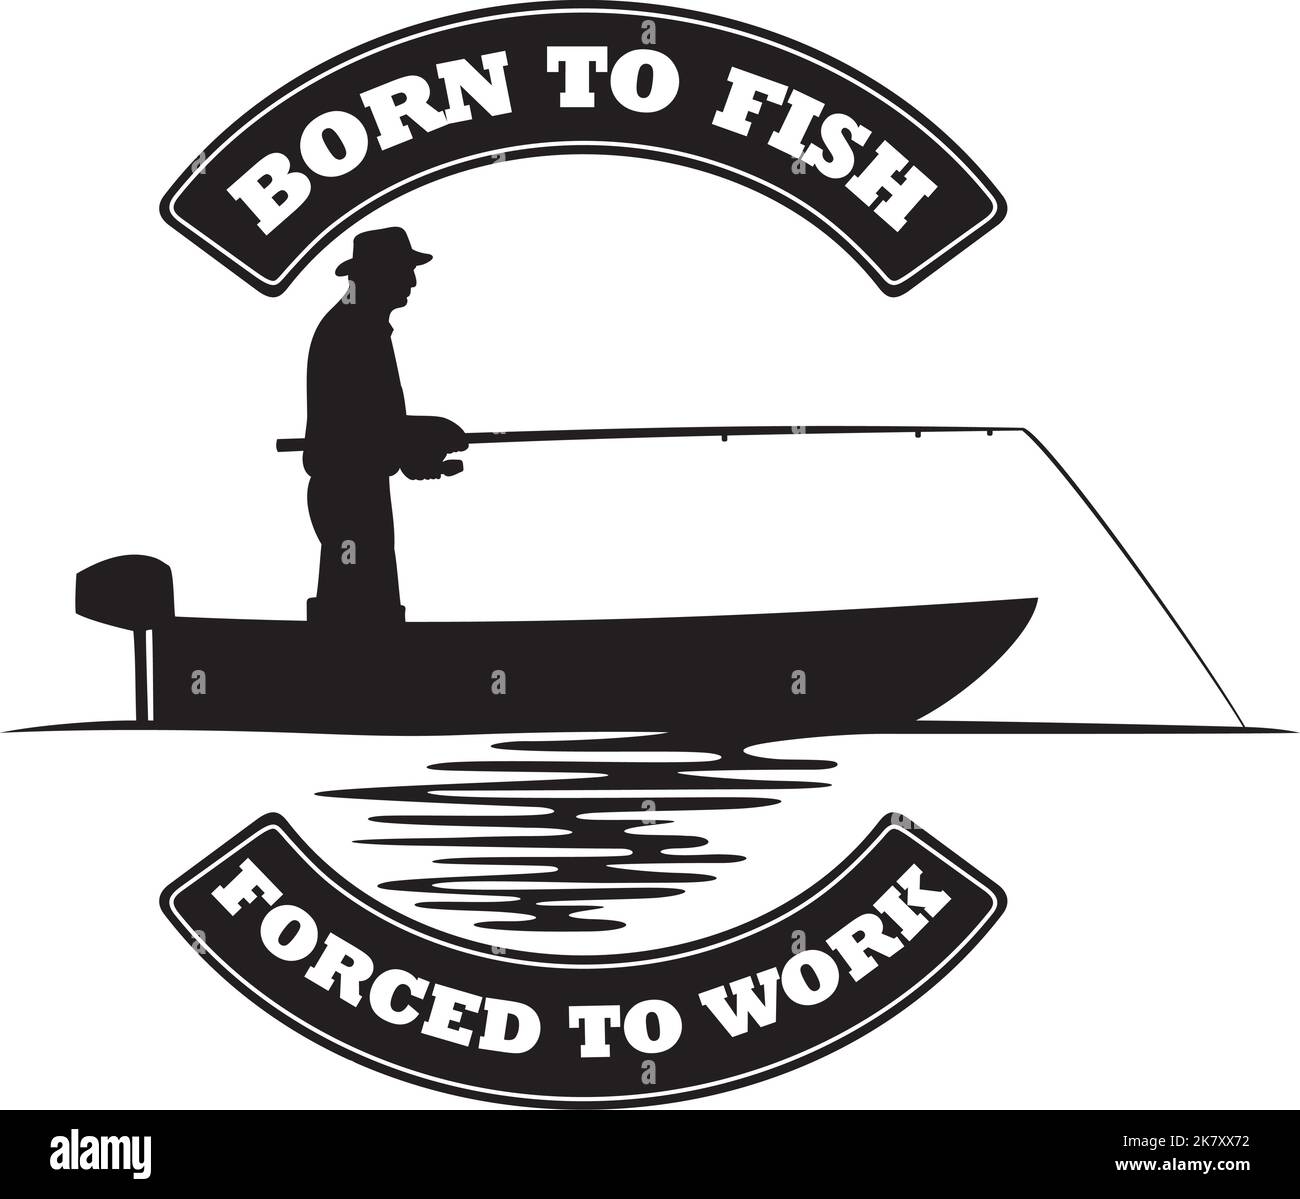 Born to Fish, Forced to Work Vector Illustration Stock Vector